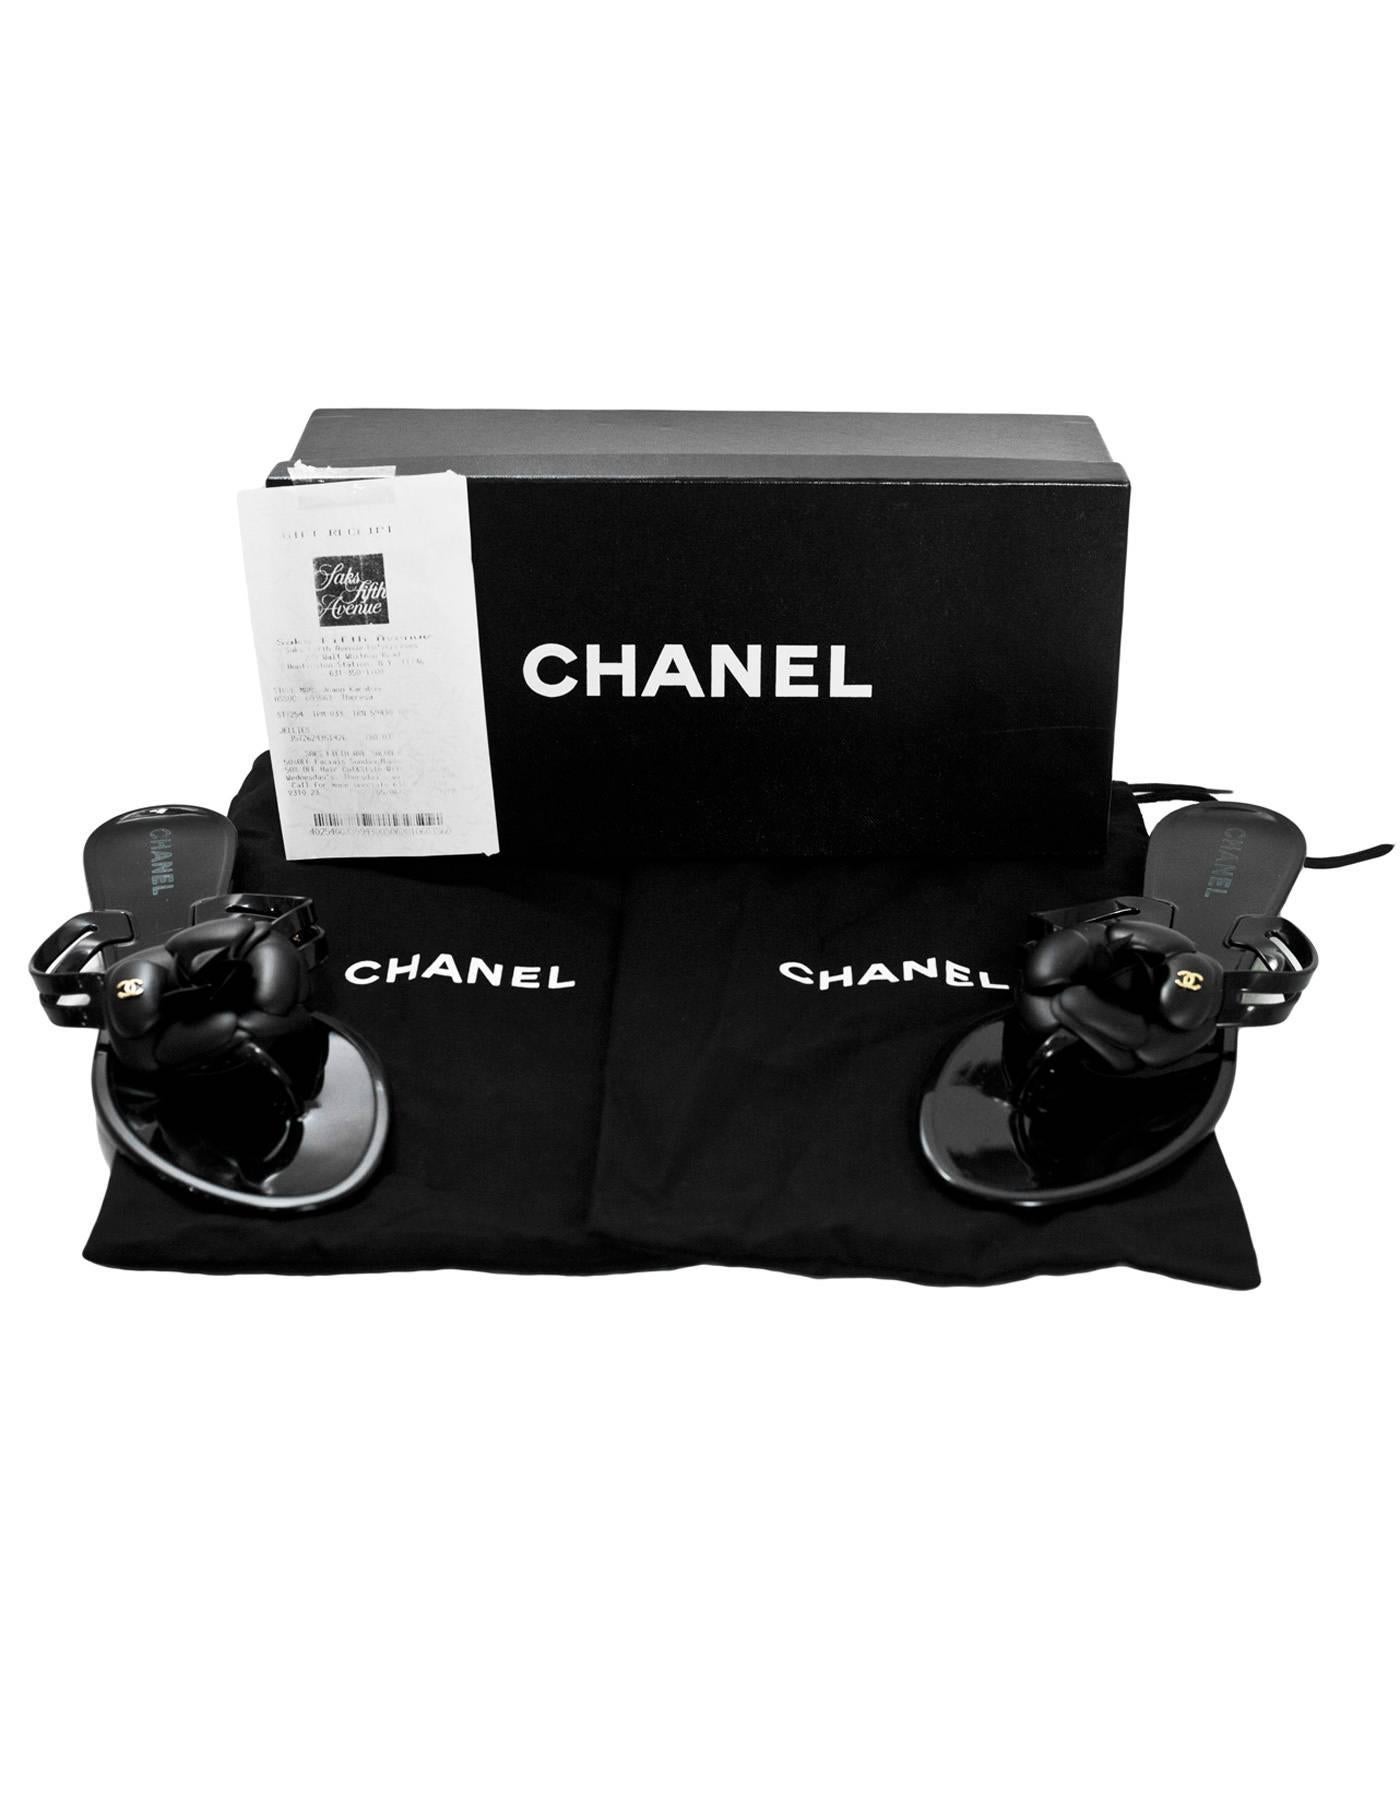 Chanel Black Jelly Camellia Sandals Sz 39 with Box 2